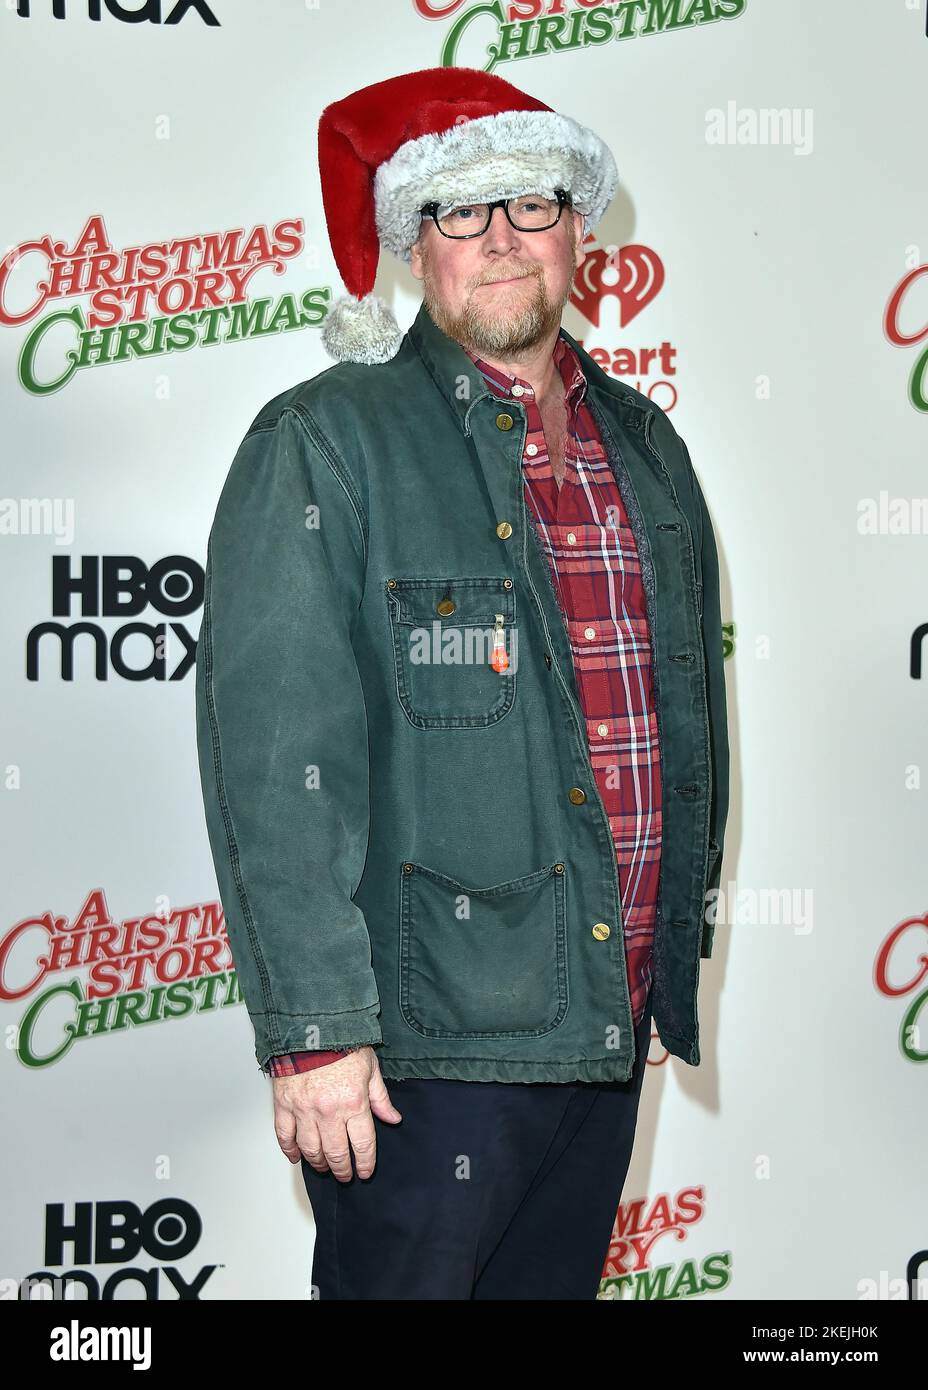 Los Angeles, USA. 12th Nov, 2022. Nick Schenk (Executive Producer) walking the red carpet at the Warner Brothers and HBO Max Special Outdoor Screening of “A Christmas Story Christmas” at The Autry Museum at Griffith Park in Los Angeles, CA on November 12, 2022. (Photo By Scott Kirkland/Sipa USA) Credit: Sipa USA/Alamy Live News Stock Photo